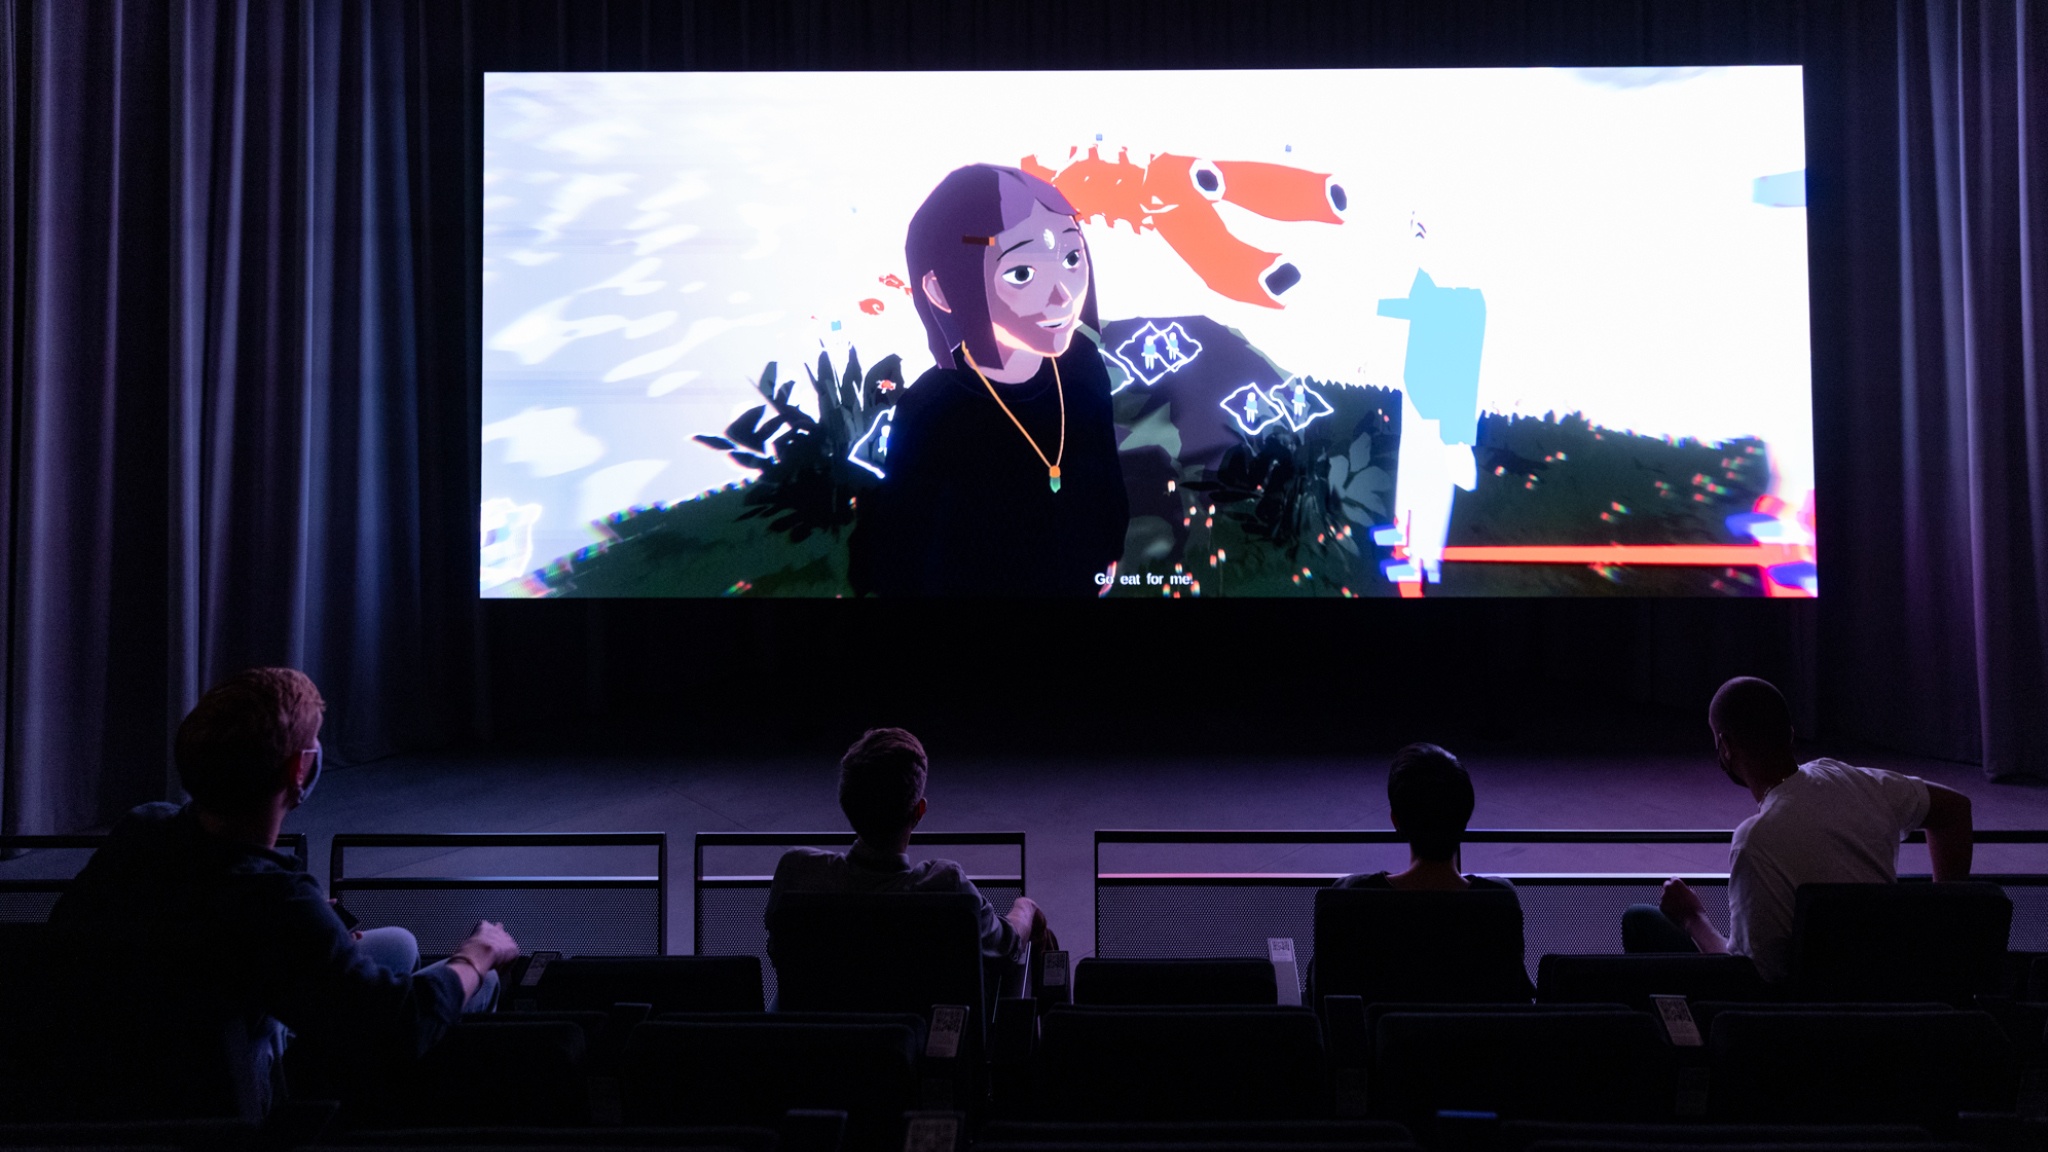 A film screen with a scene from an anime projected on it, with in the foreground the back of four viewers' heads pictured from higher up in the cinema-style seating